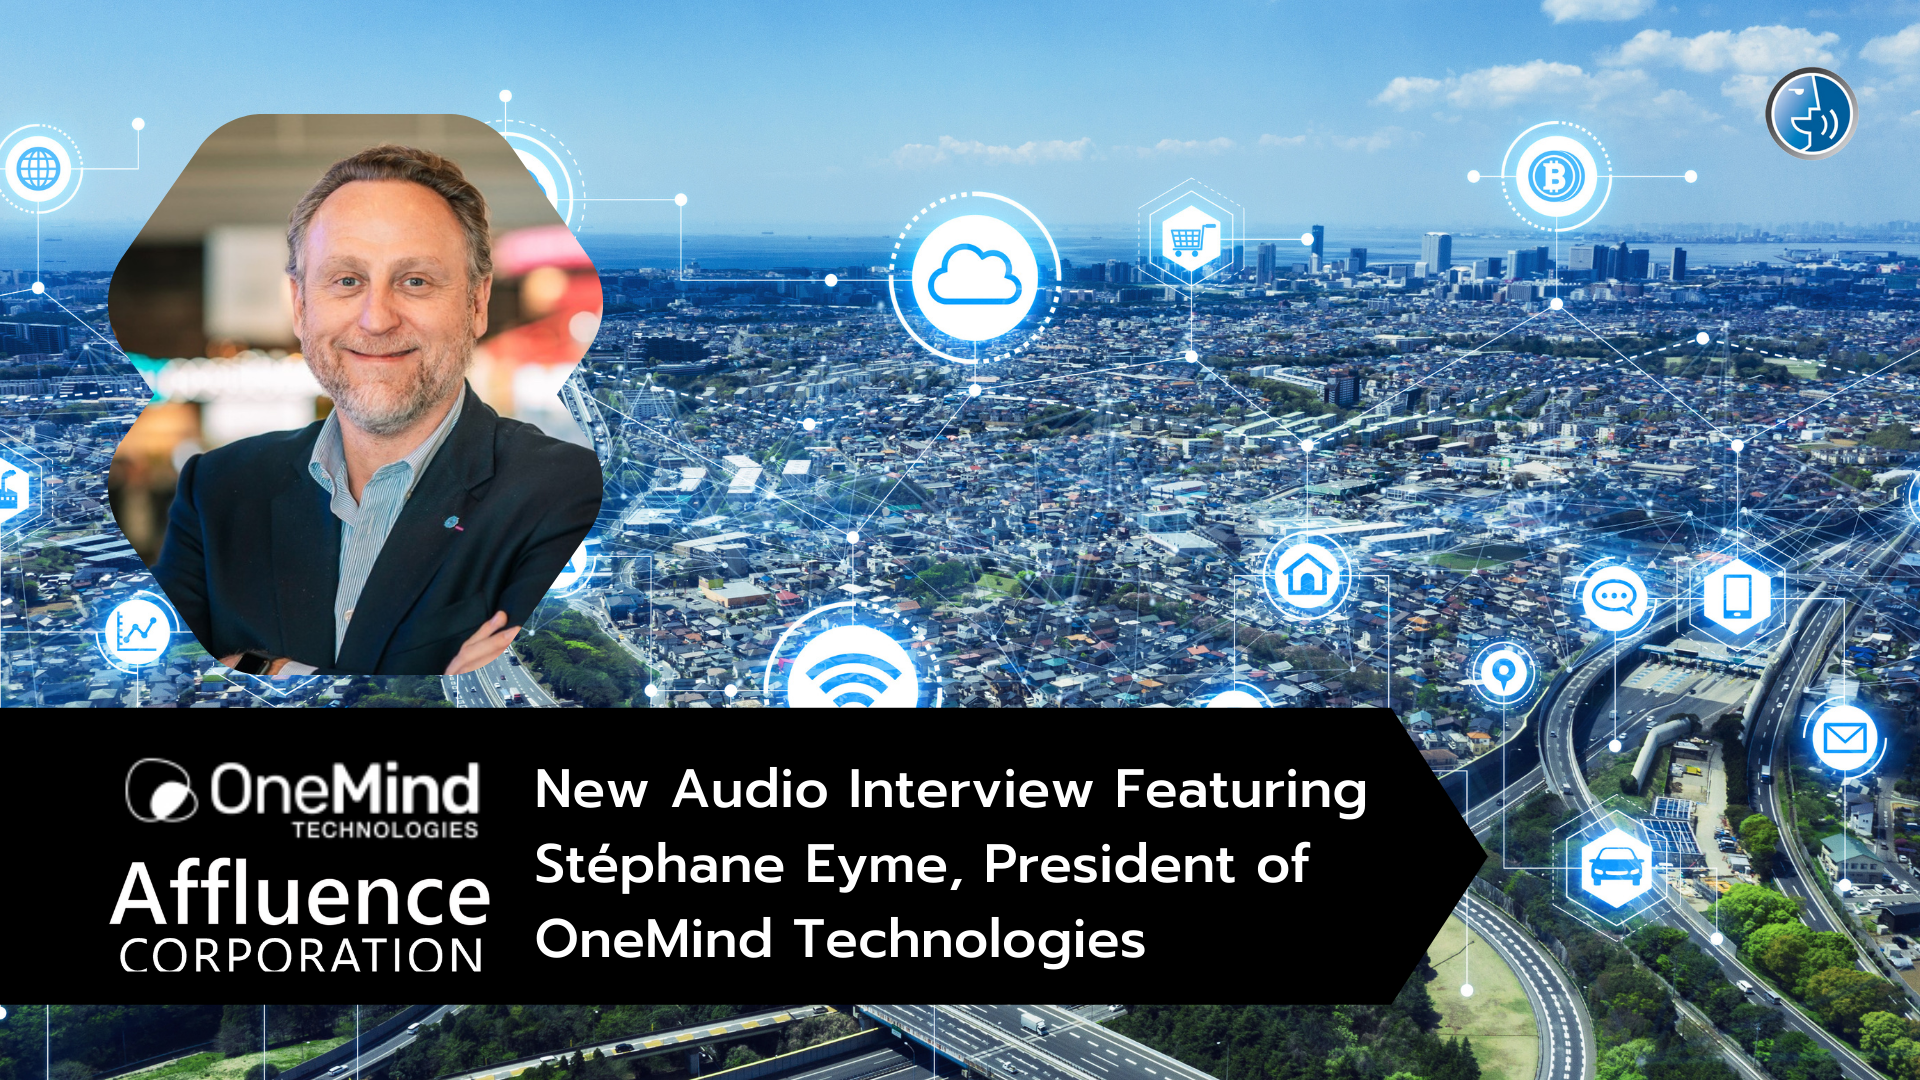 New Audio Interview Featuring Stéphane Eyme, President of OneMind Technologies